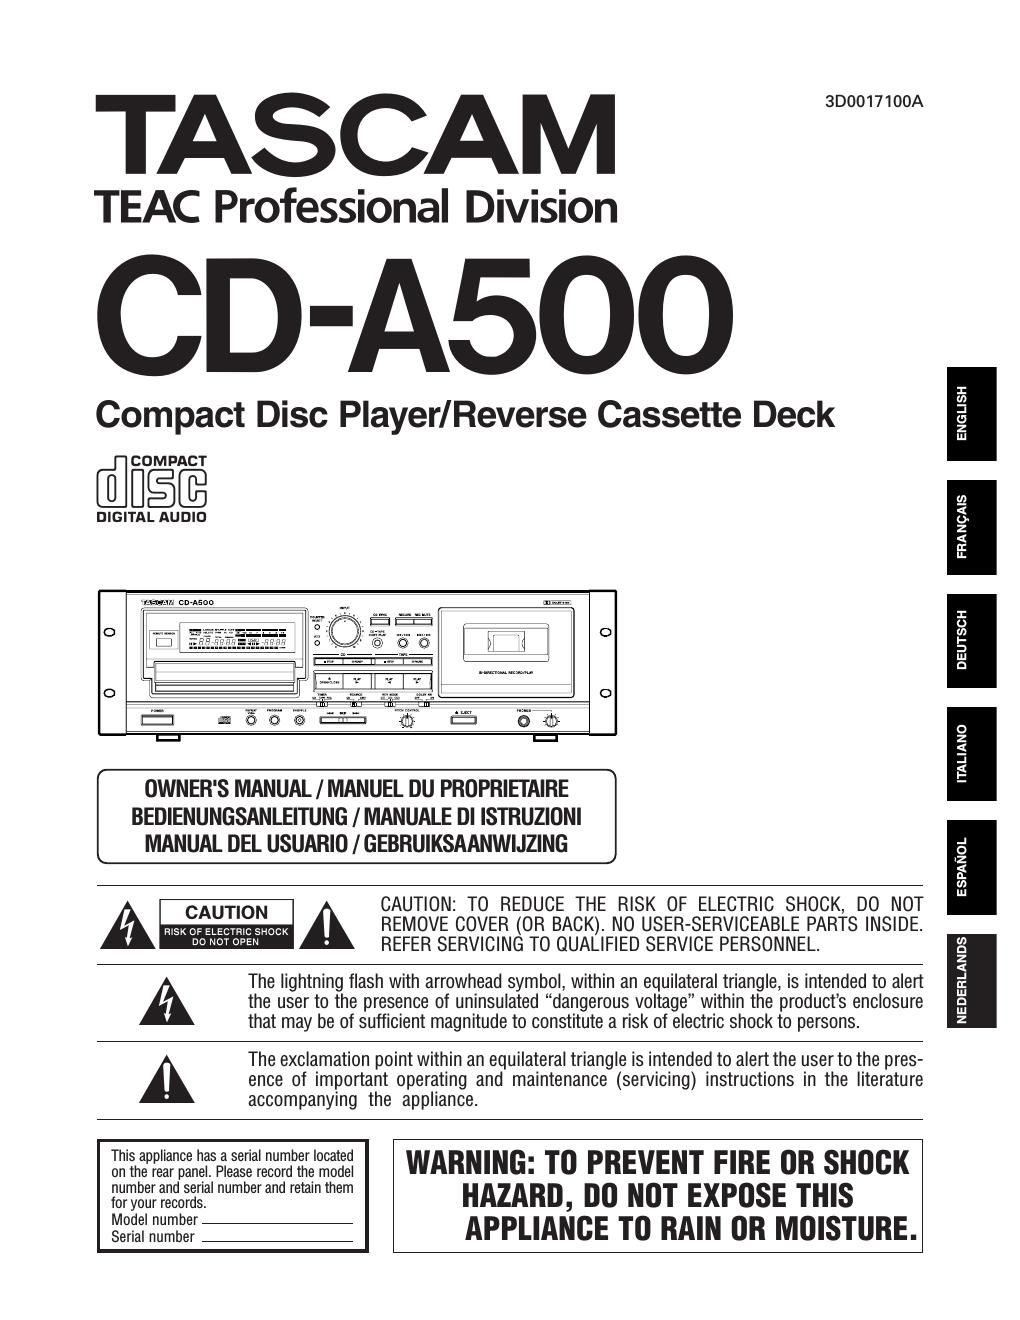 Tascam CD A500 Owners Manual